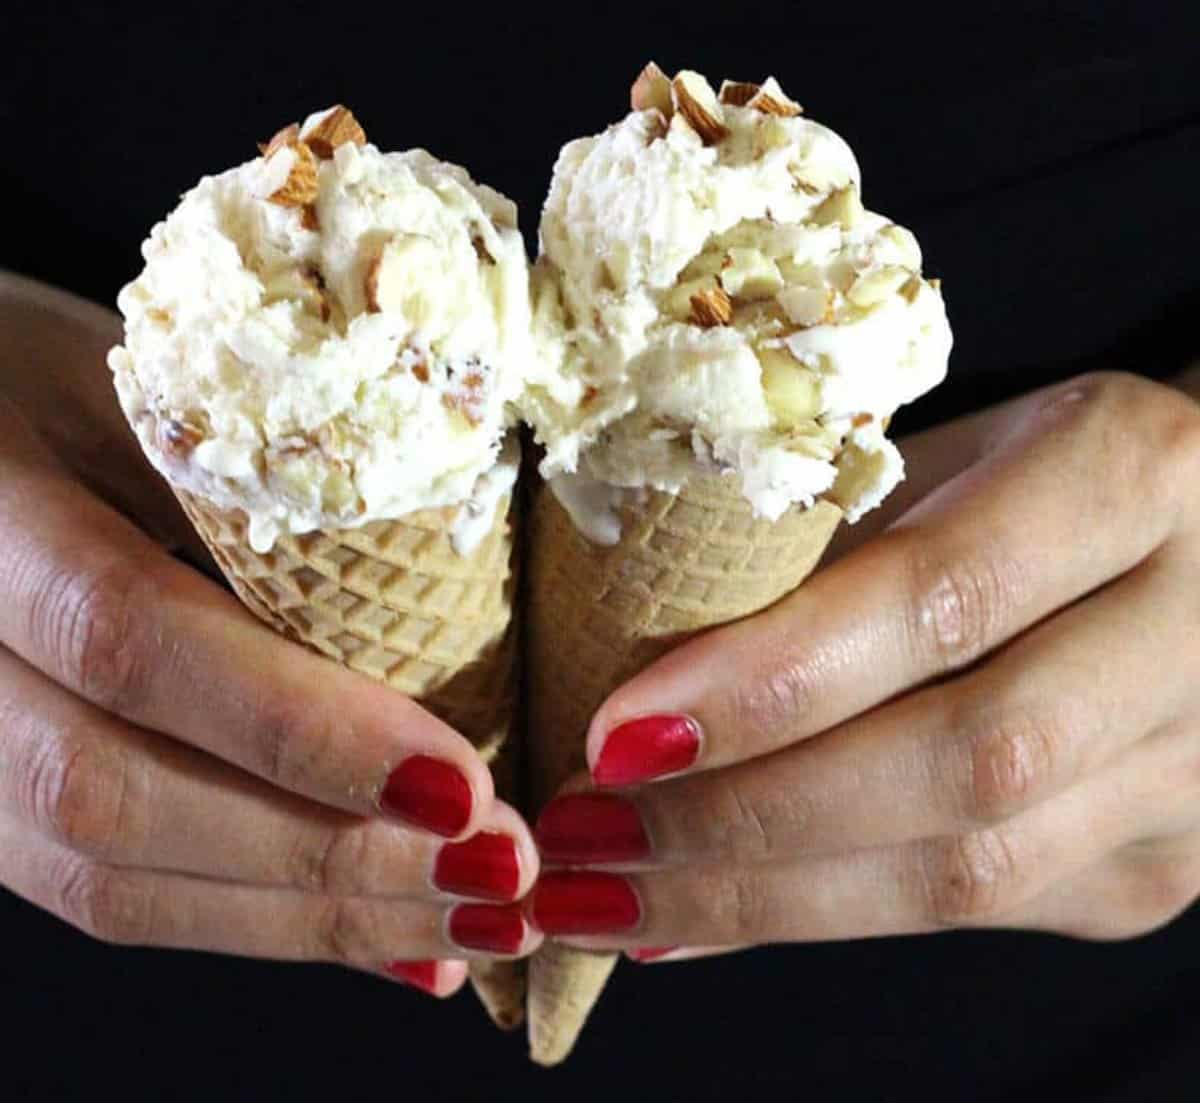 Scoops of delicious homemade roasted almond ice cream in two waffle cones held in hand.